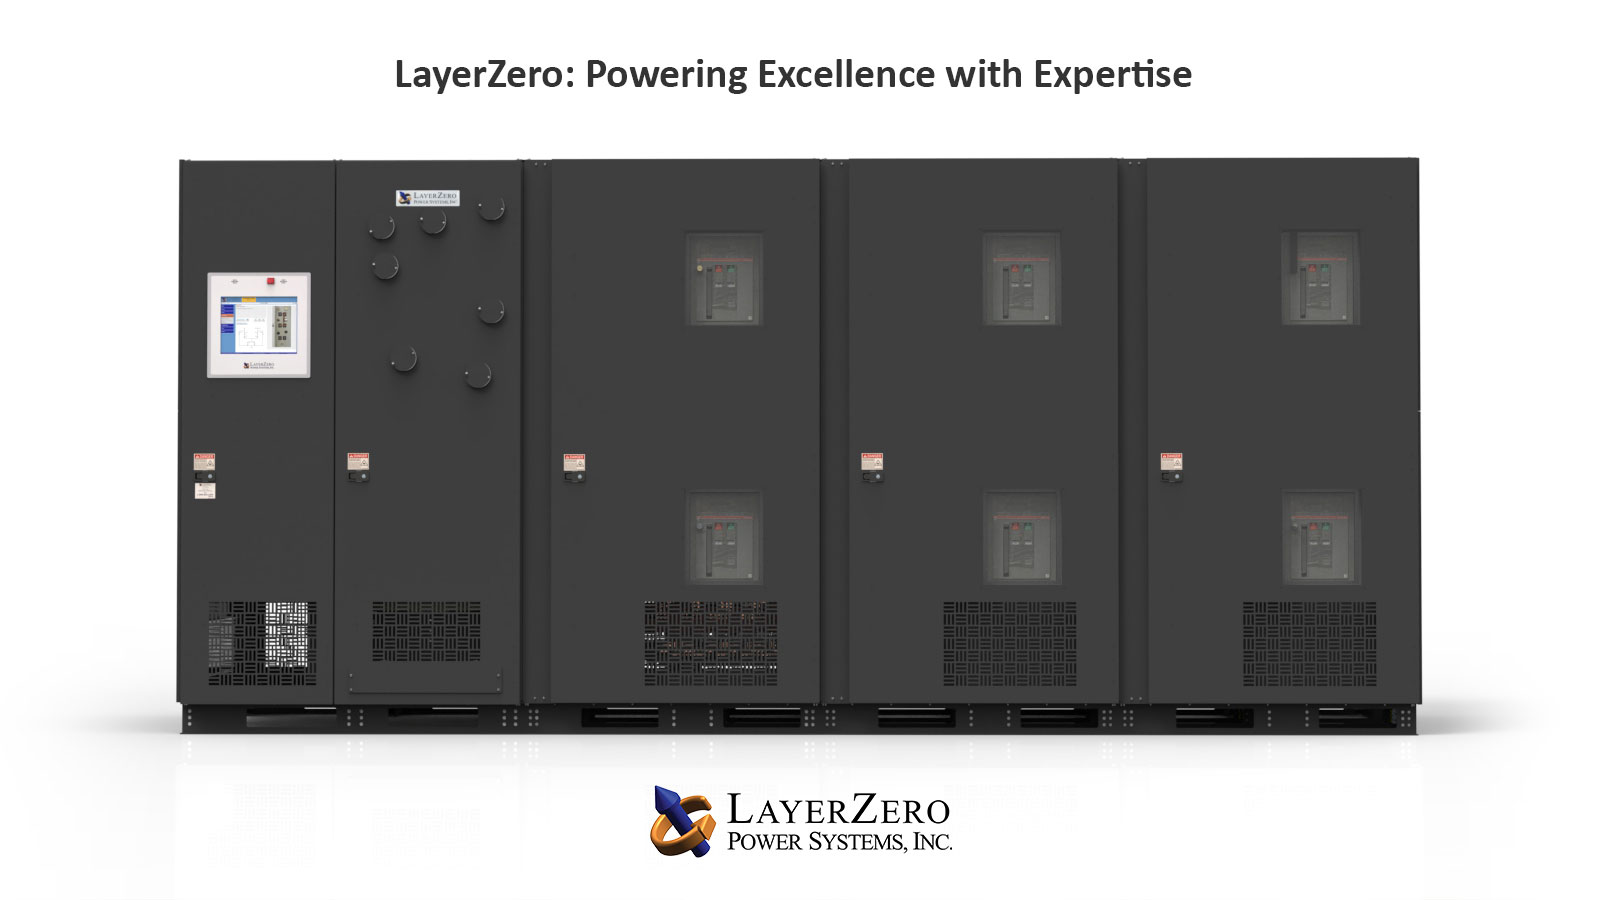 LayerZero: Powering Excellence with Expertise